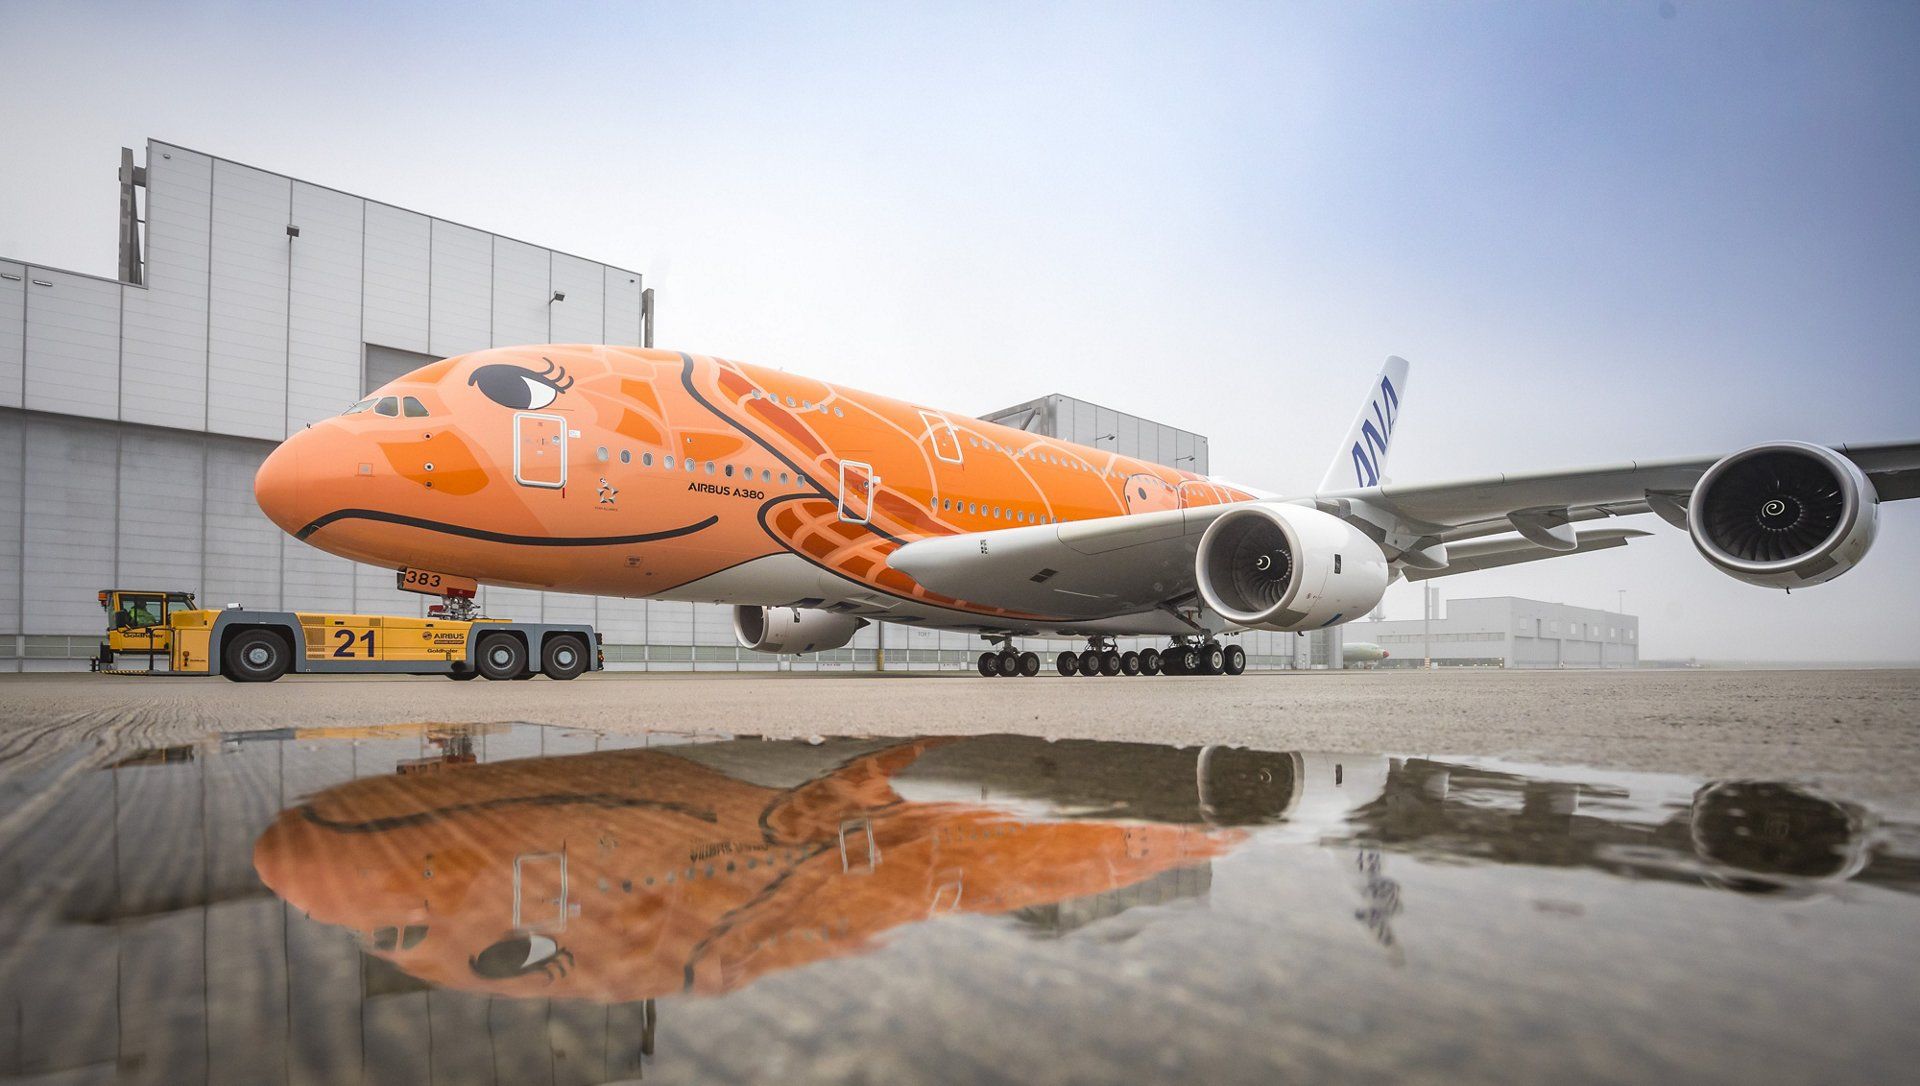 ANA's Last Airbus A380 Departs Toulouse For Its New Tokyo Home